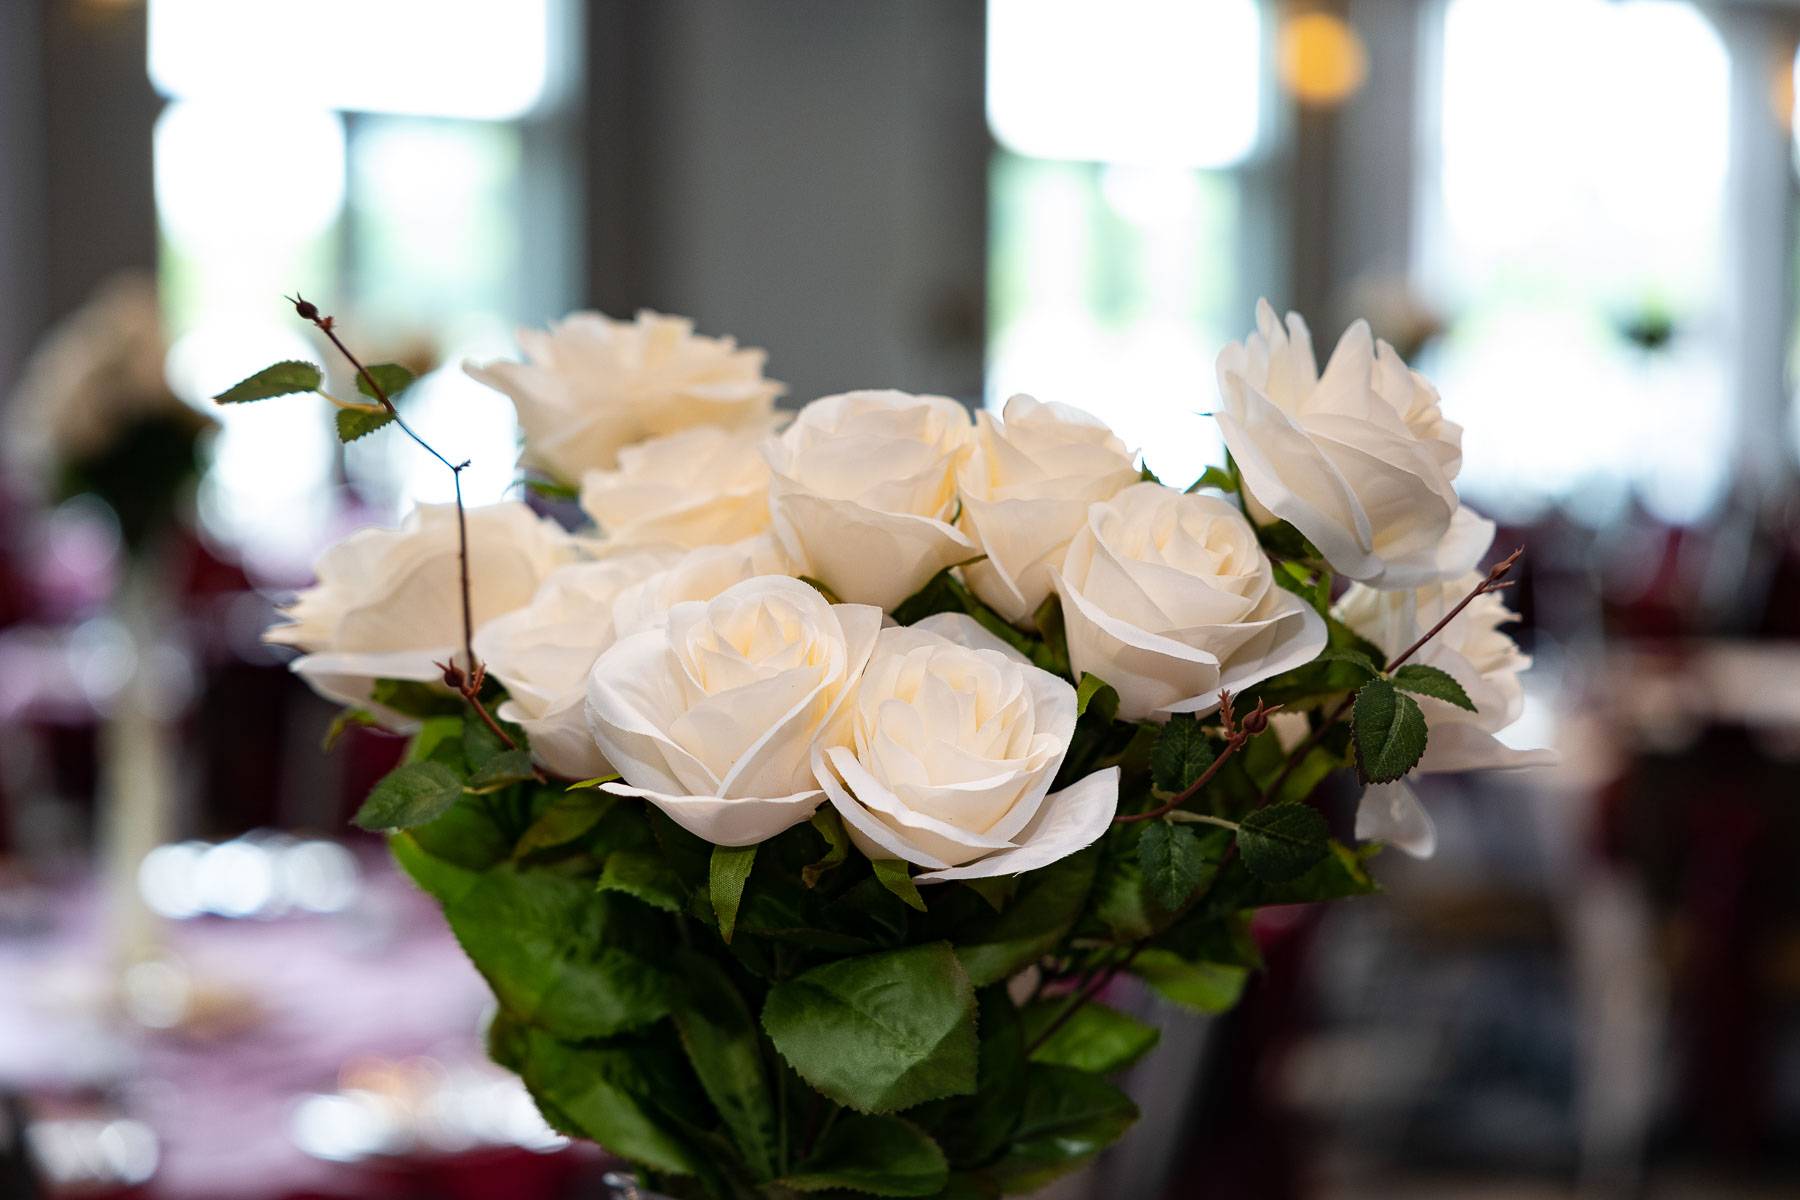 A bunch of white roses